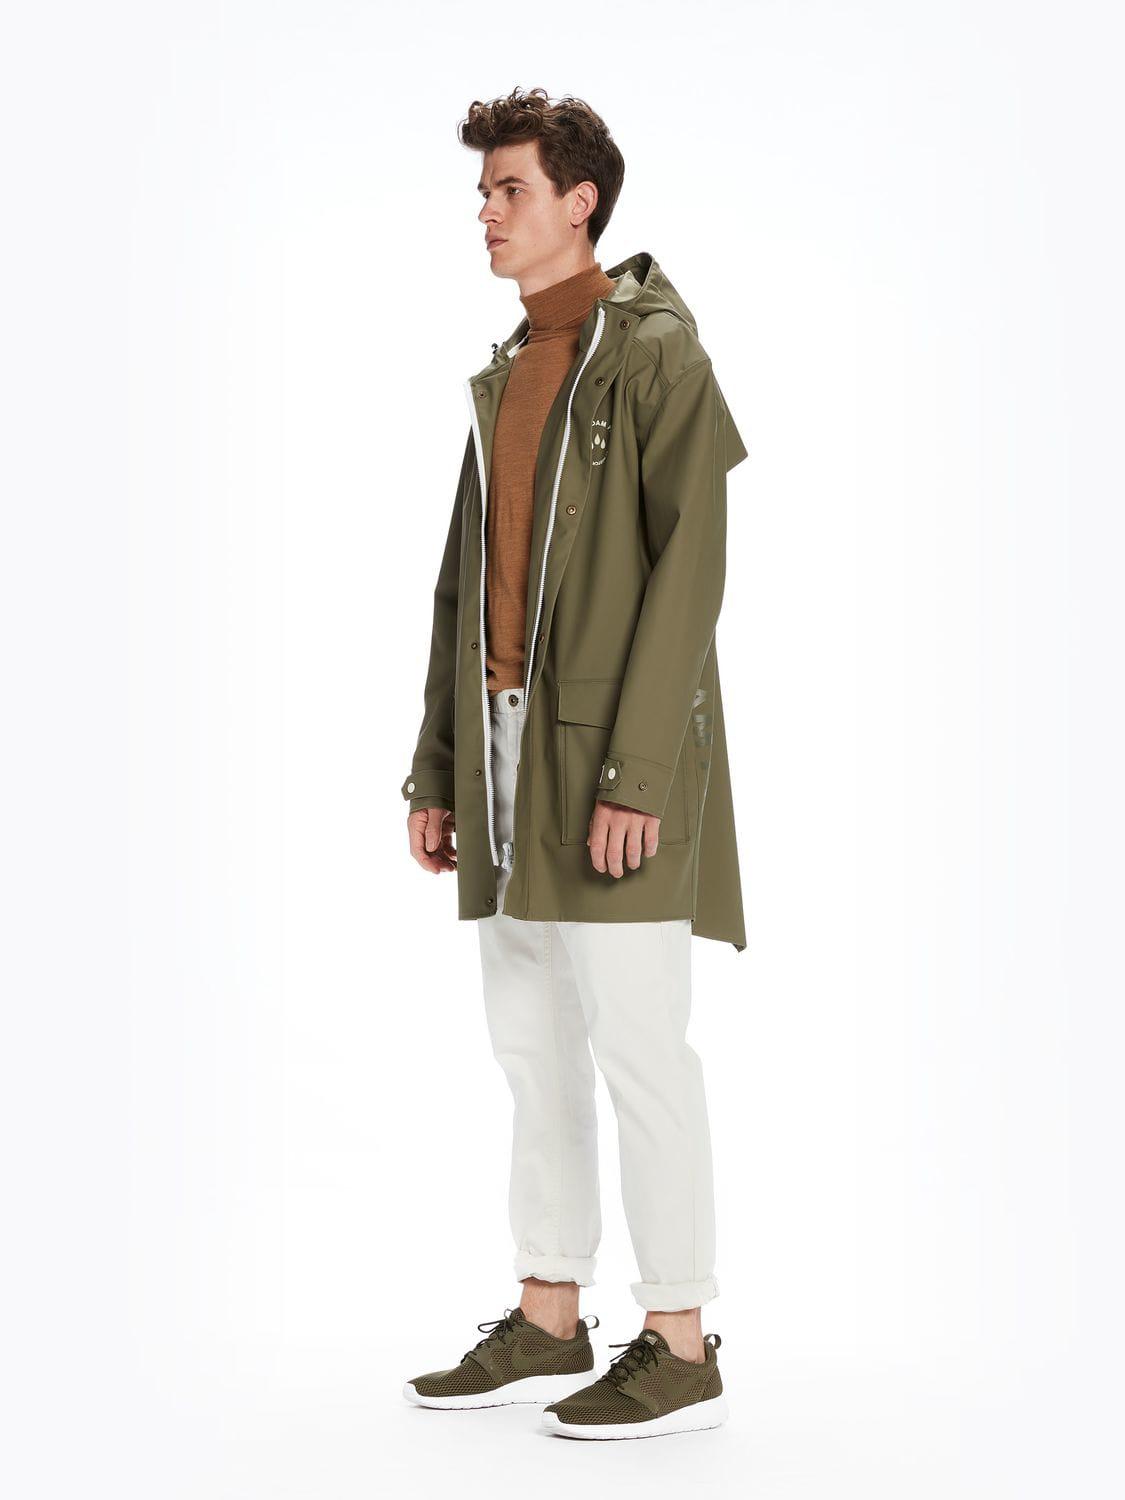 Scotch & Soda Synthetic Rain Parka Amsterdam Proof in Sage (Green) for Men  - Lyst